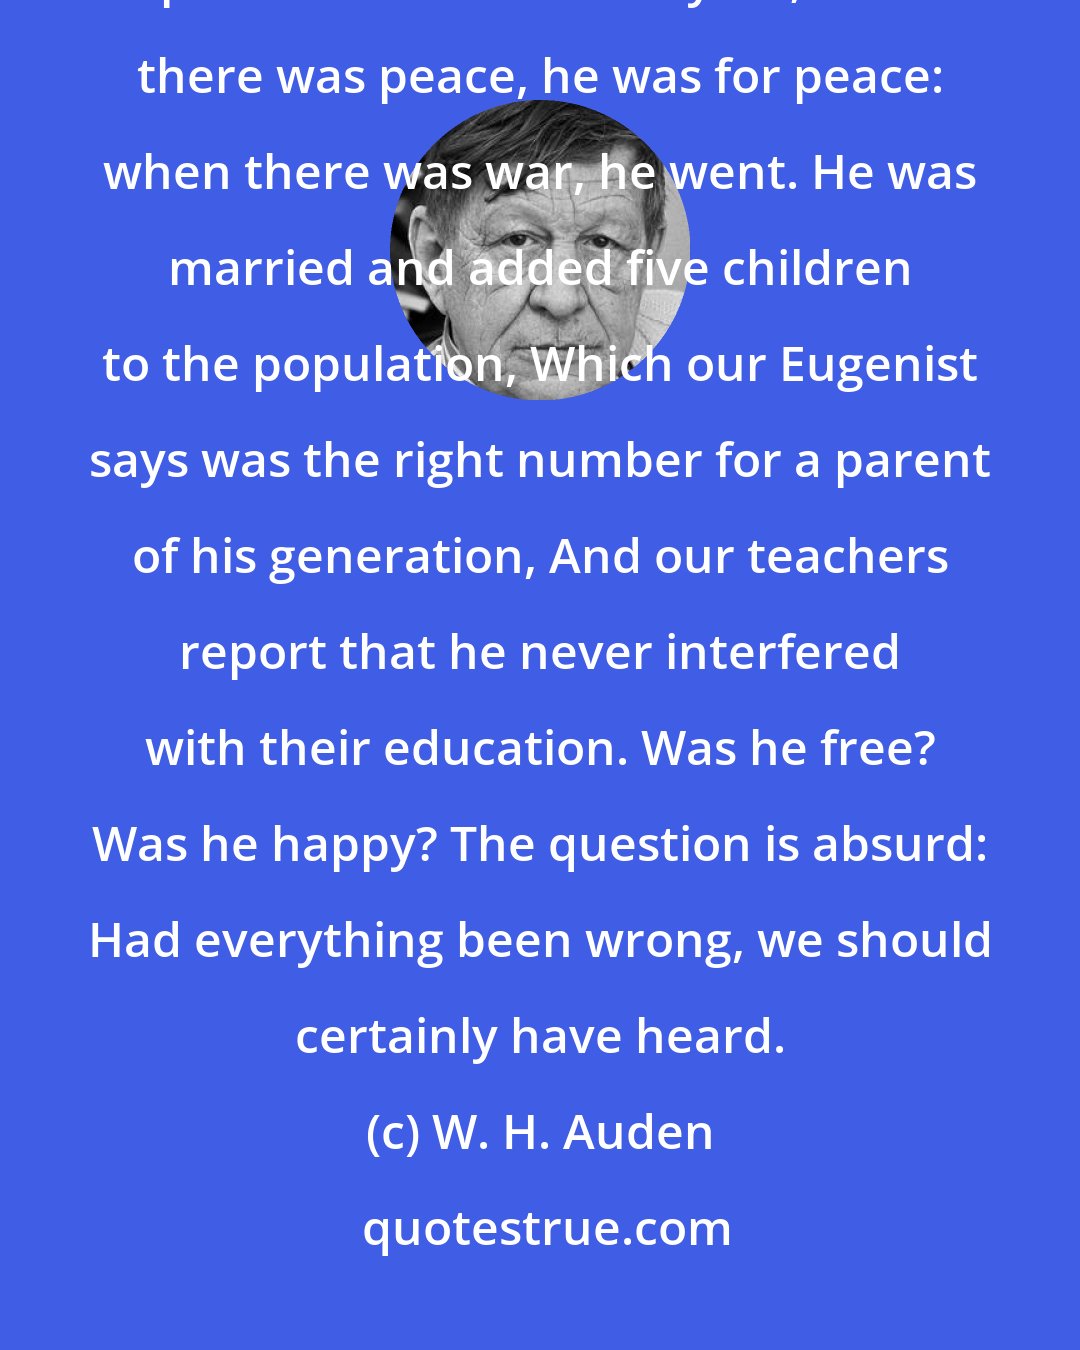 W. H. Auden: Our researchers into Public Opinion are content That he held the proper opinions for the time of year; When there was peace, he was for peace: when there was war, he went. He was married and added five children to the population, Which our Eugenist says was the right number for a parent of his generation, And our teachers report that he never interfered with their education. Was he free? Was he happy? The question is absurd: Had everything been wrong, we should certainly have heard.